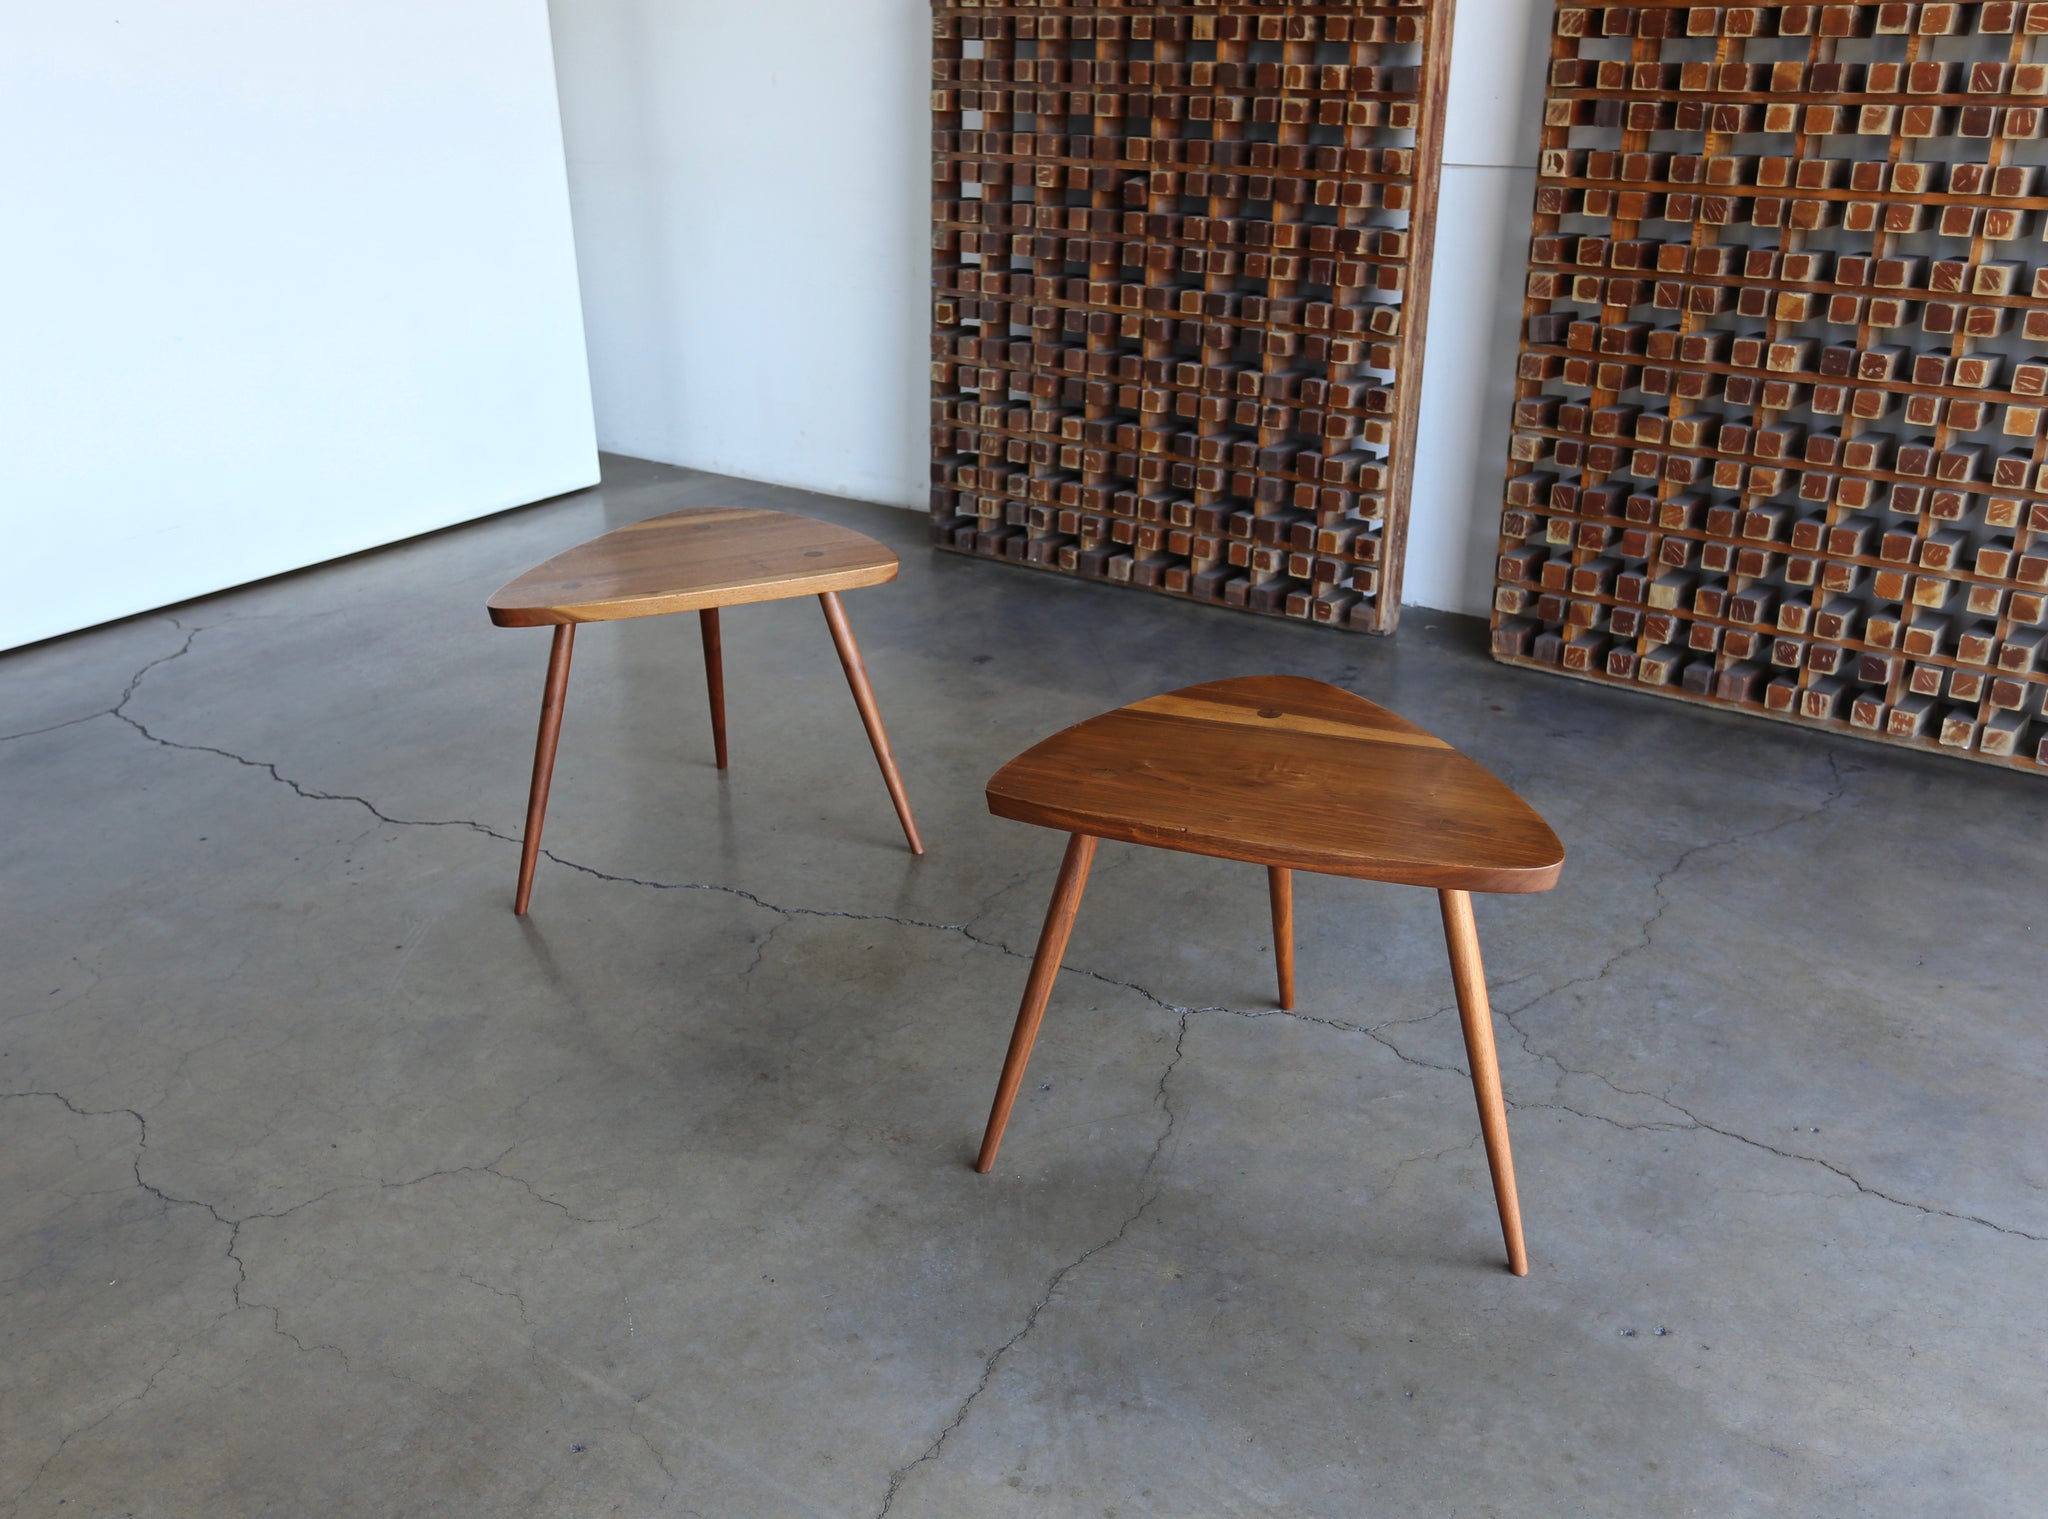 = SOLD = George Nakashima Handcrafted "Wohl" Occasional Tables, 1954